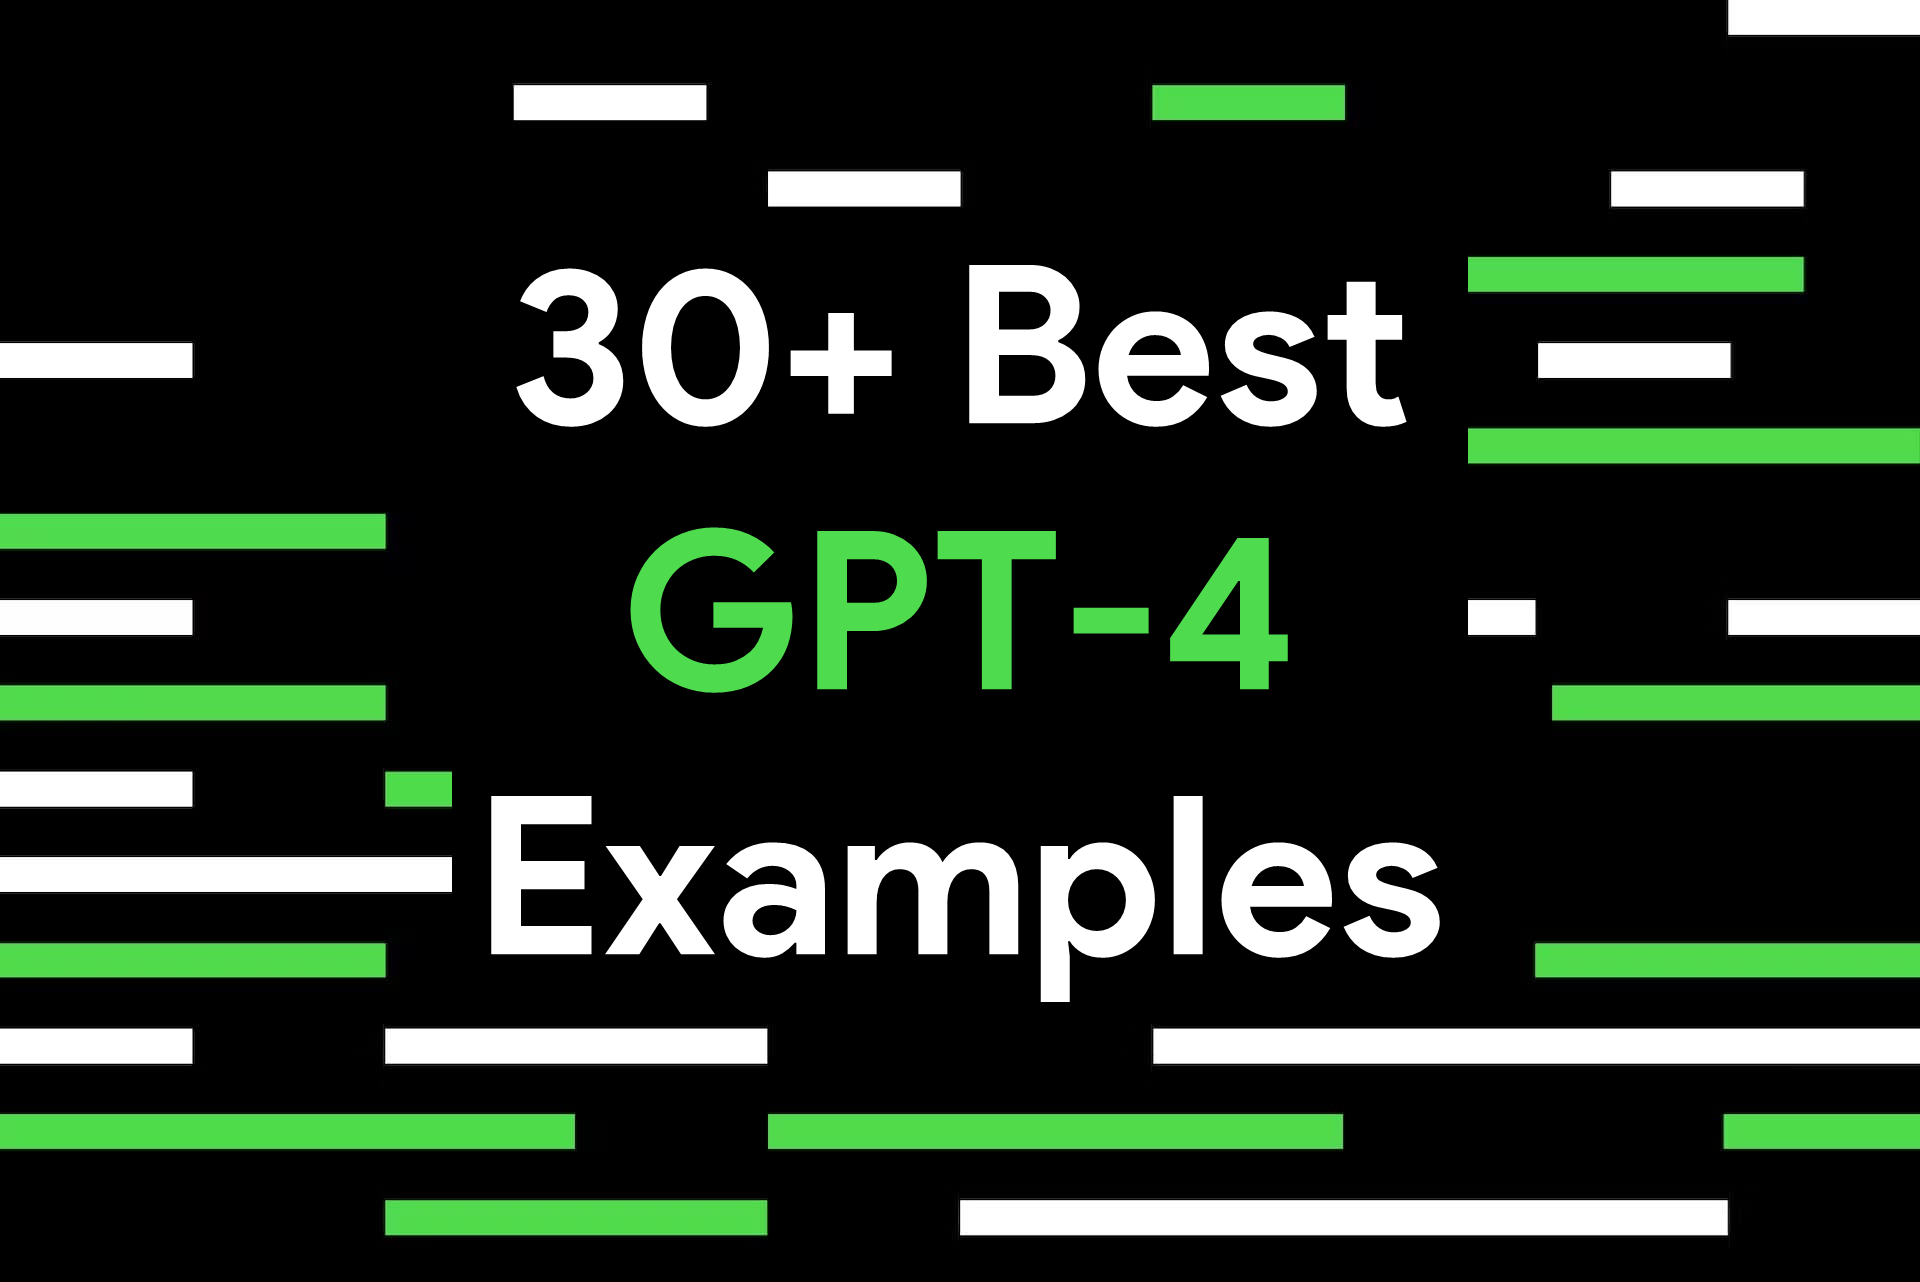 GPT4 Examples